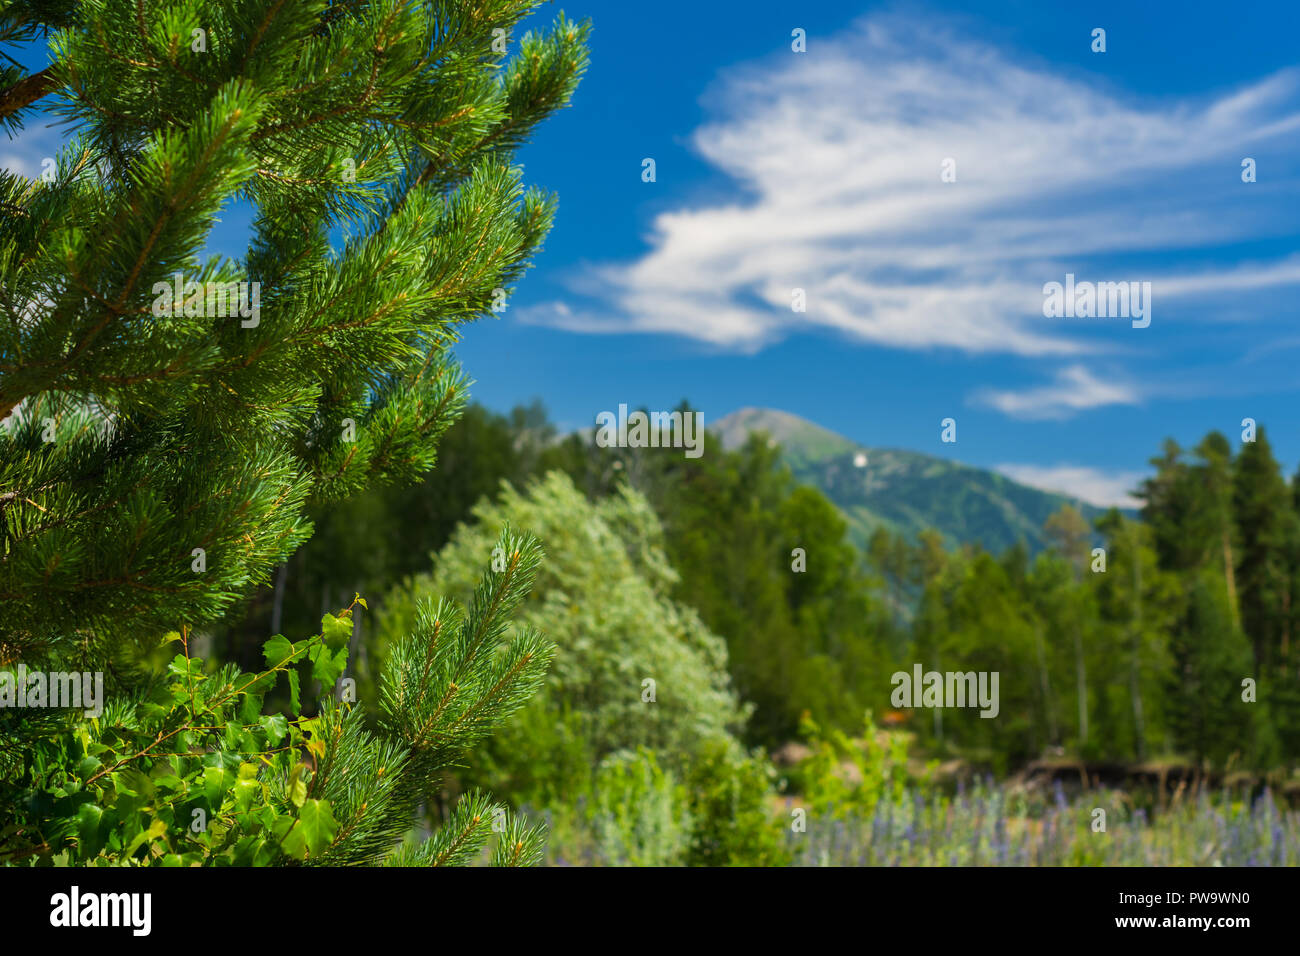 Cedar, Birch Branches, Blurred Forest, Blue Sky and White Clouds over A Mountain On A Sunny Summer Day.  Ivanovskiy Khrebet Ridge, Altai Mountains, Ka Stock Photo